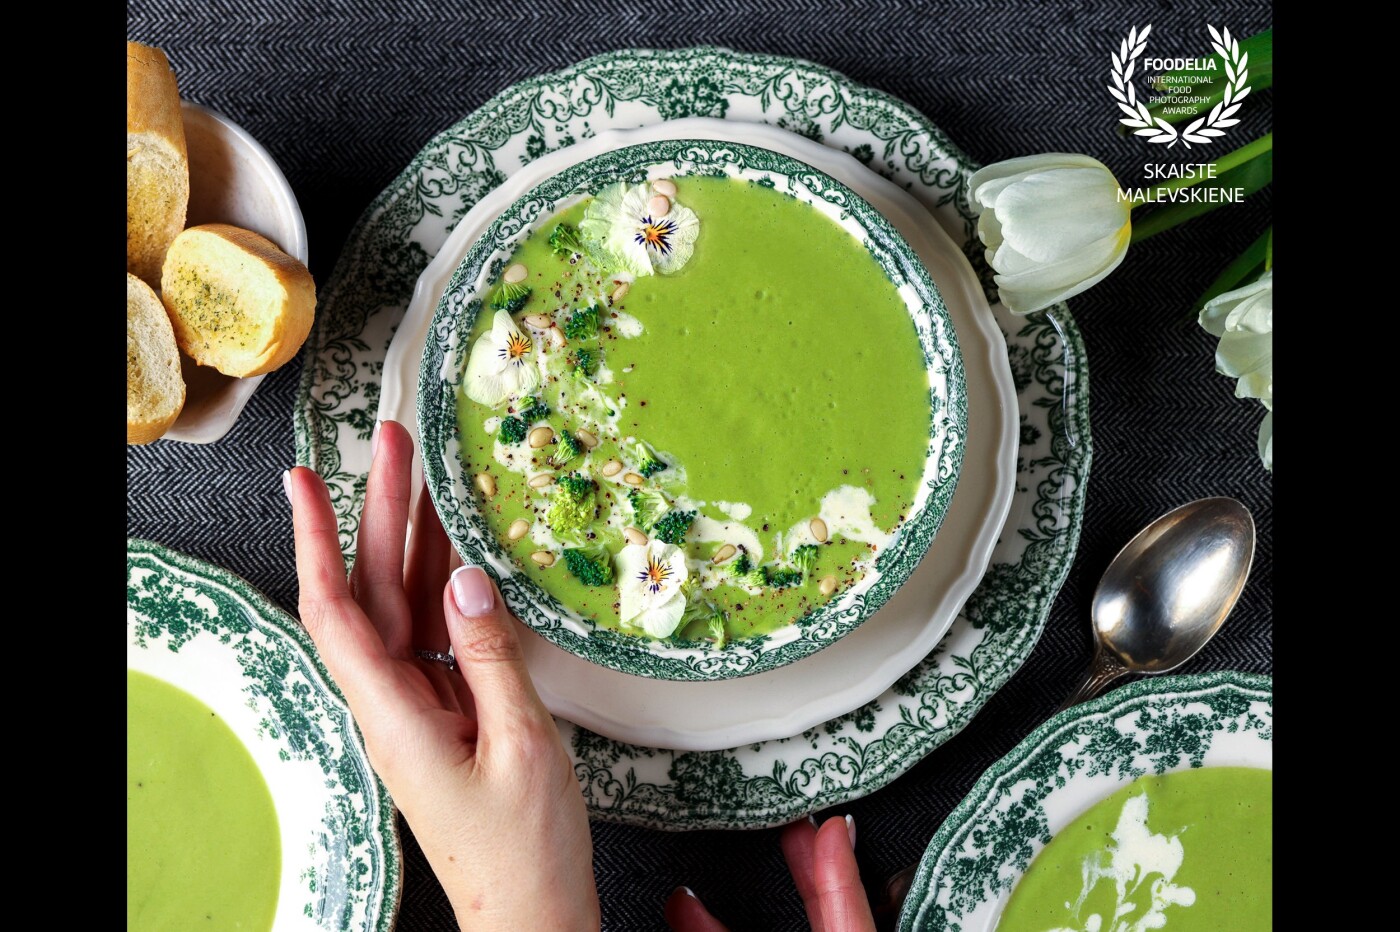 Beautiful and delicious broccoli soup styled with cream, edible flowers and pine nuts goes along so well with these magical green plates.